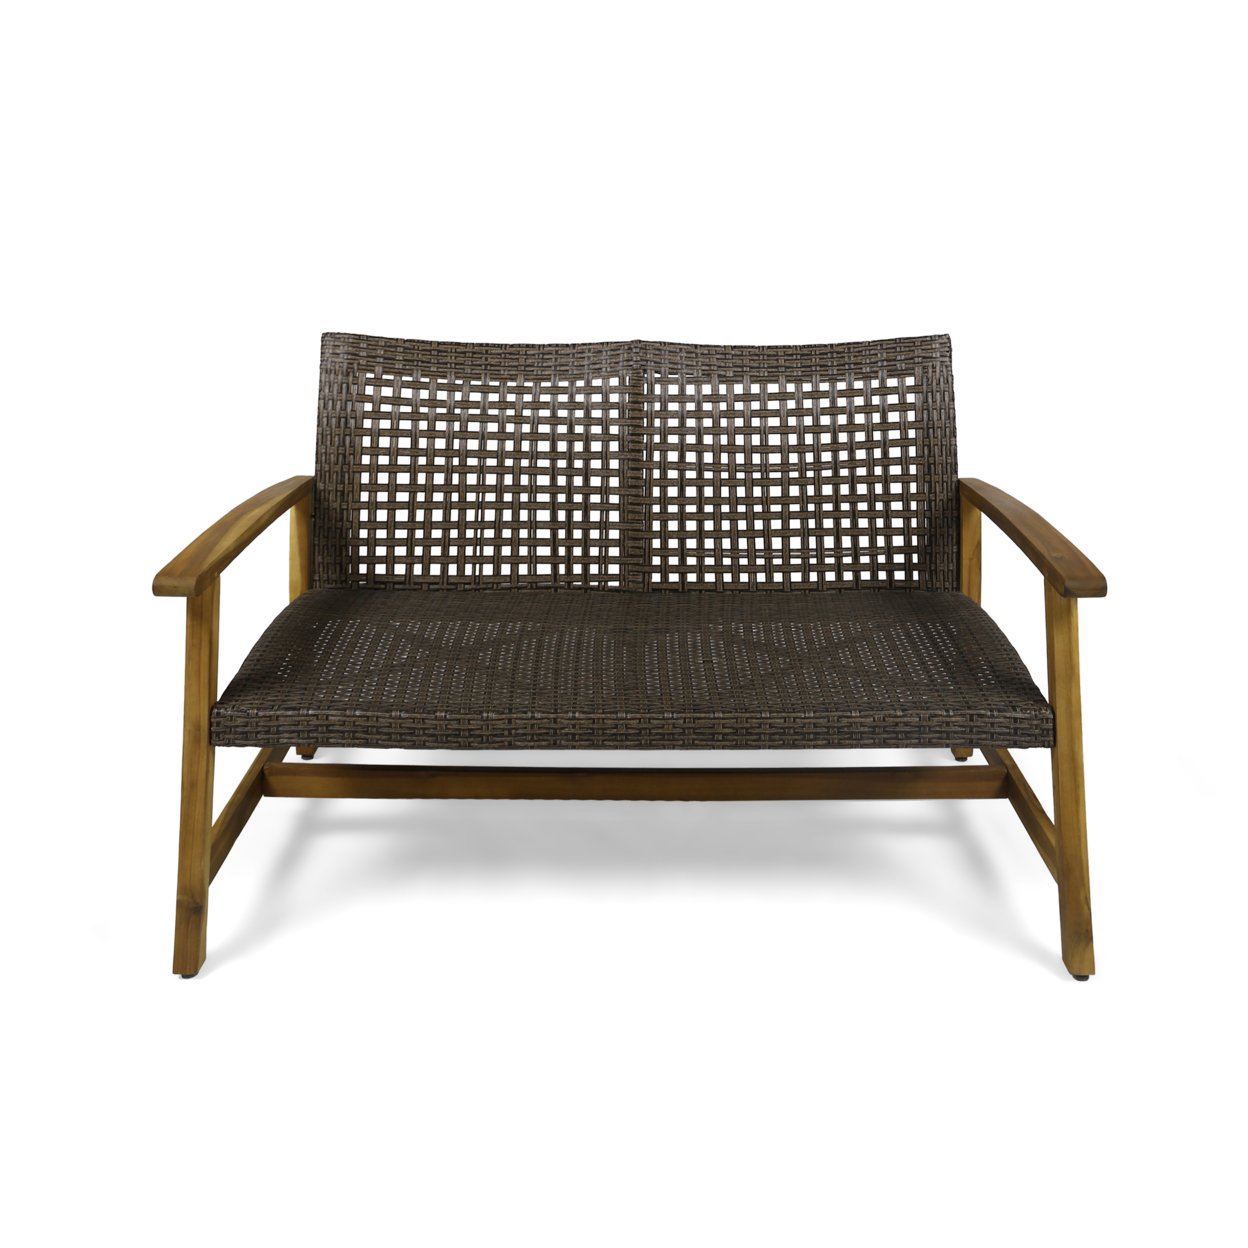 Marcia Outdoor Wood And Wicker Loveseat - Black / Light Gray